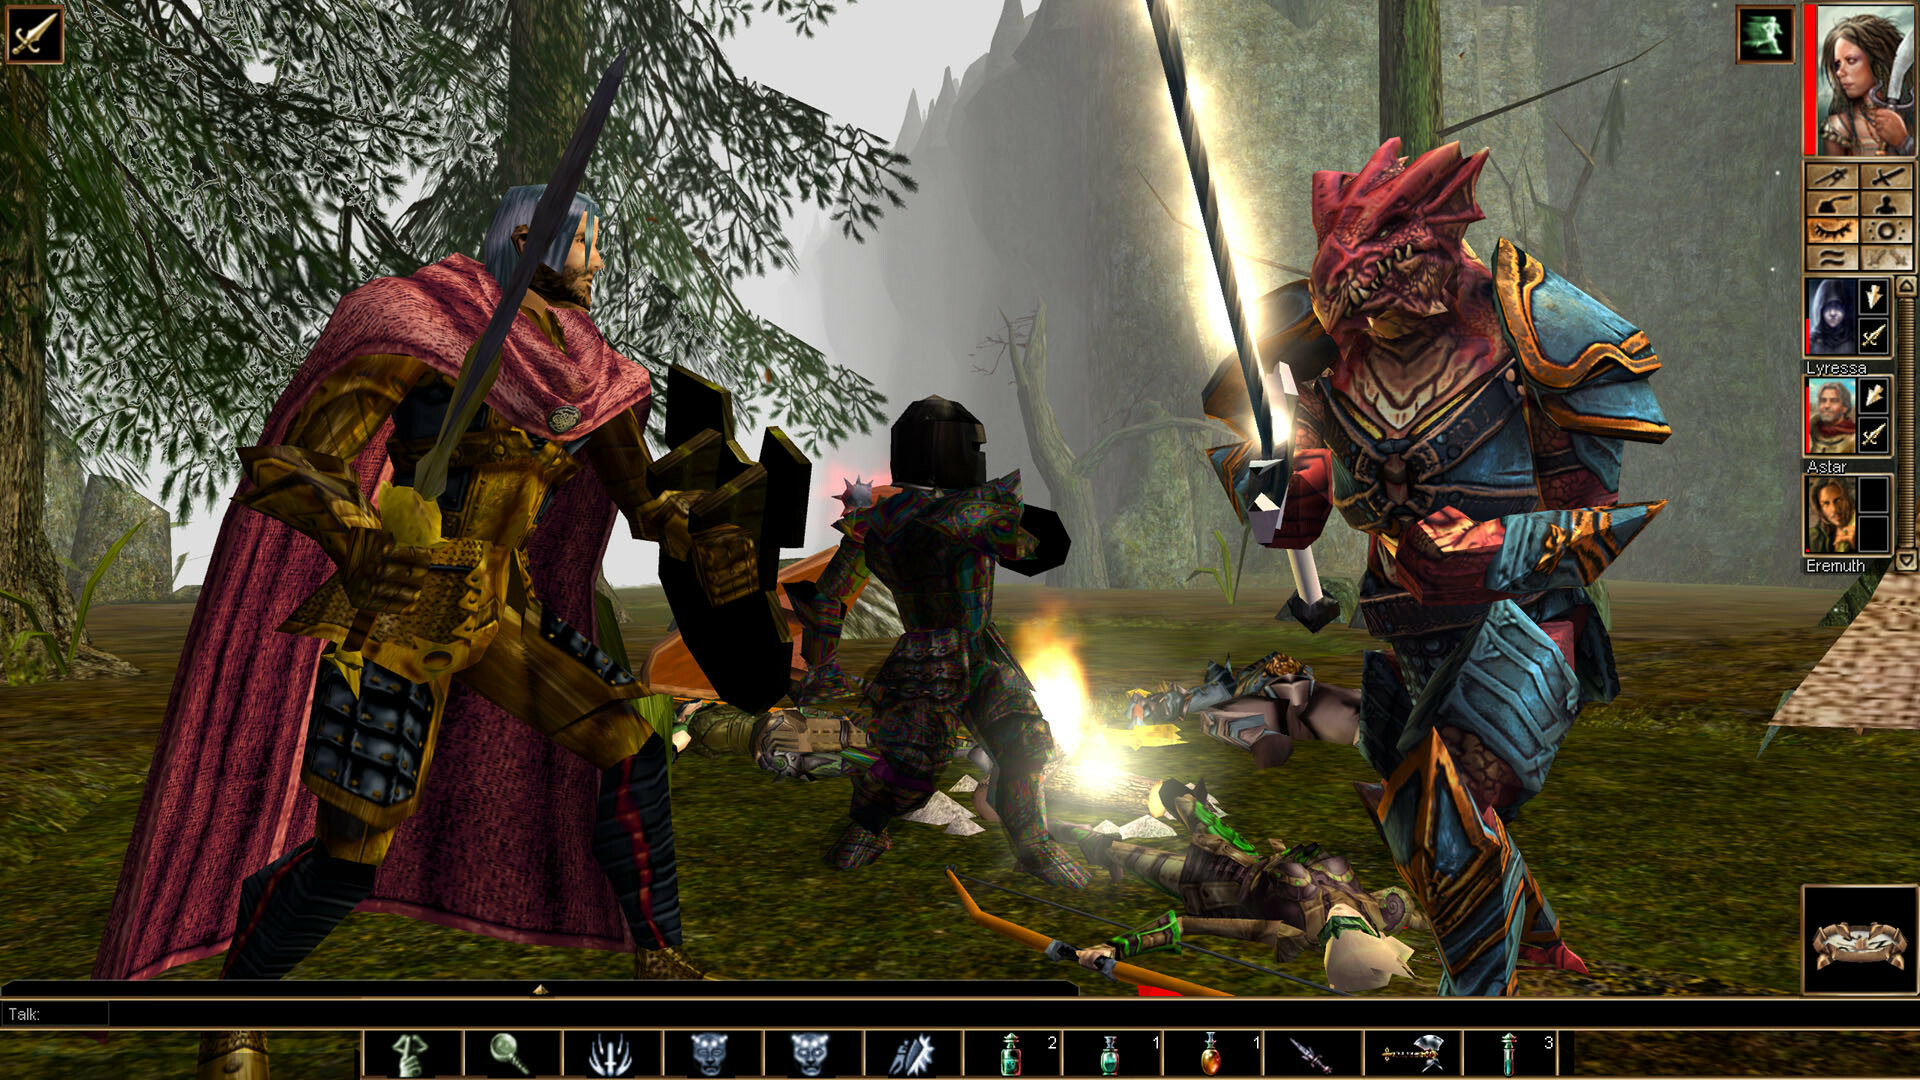 battle melee scene with adventurer squaring off against draconic enemies